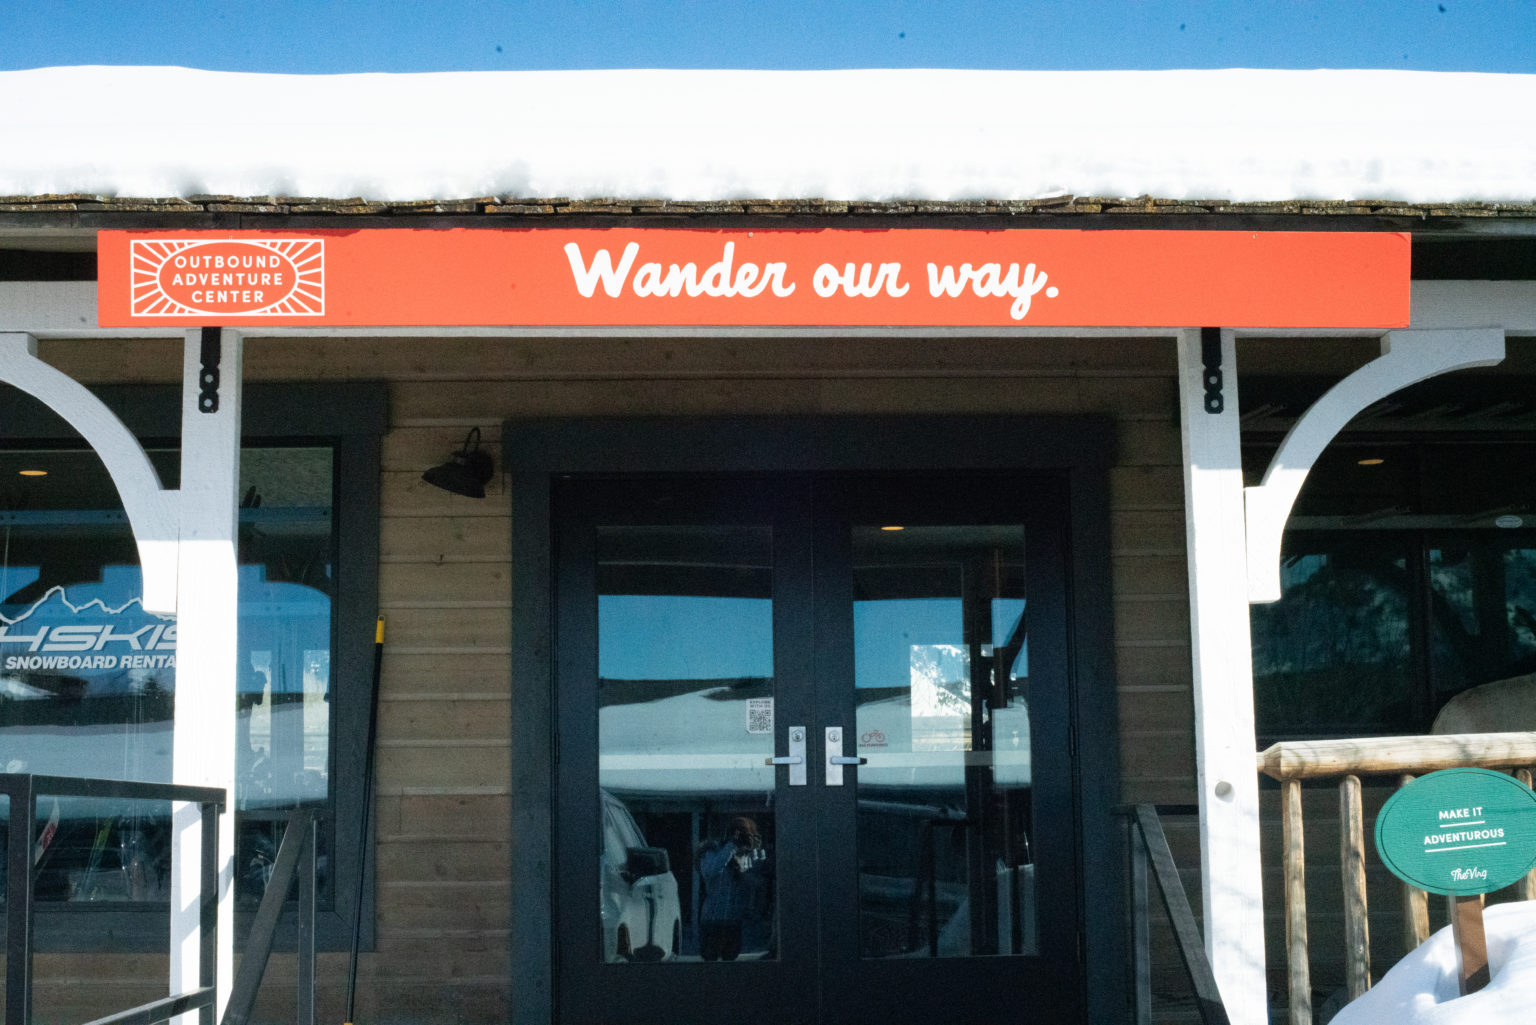 Entrance sign reads "Outbound Adventure Center - Wander Our Way," inviting exploration and discovery.